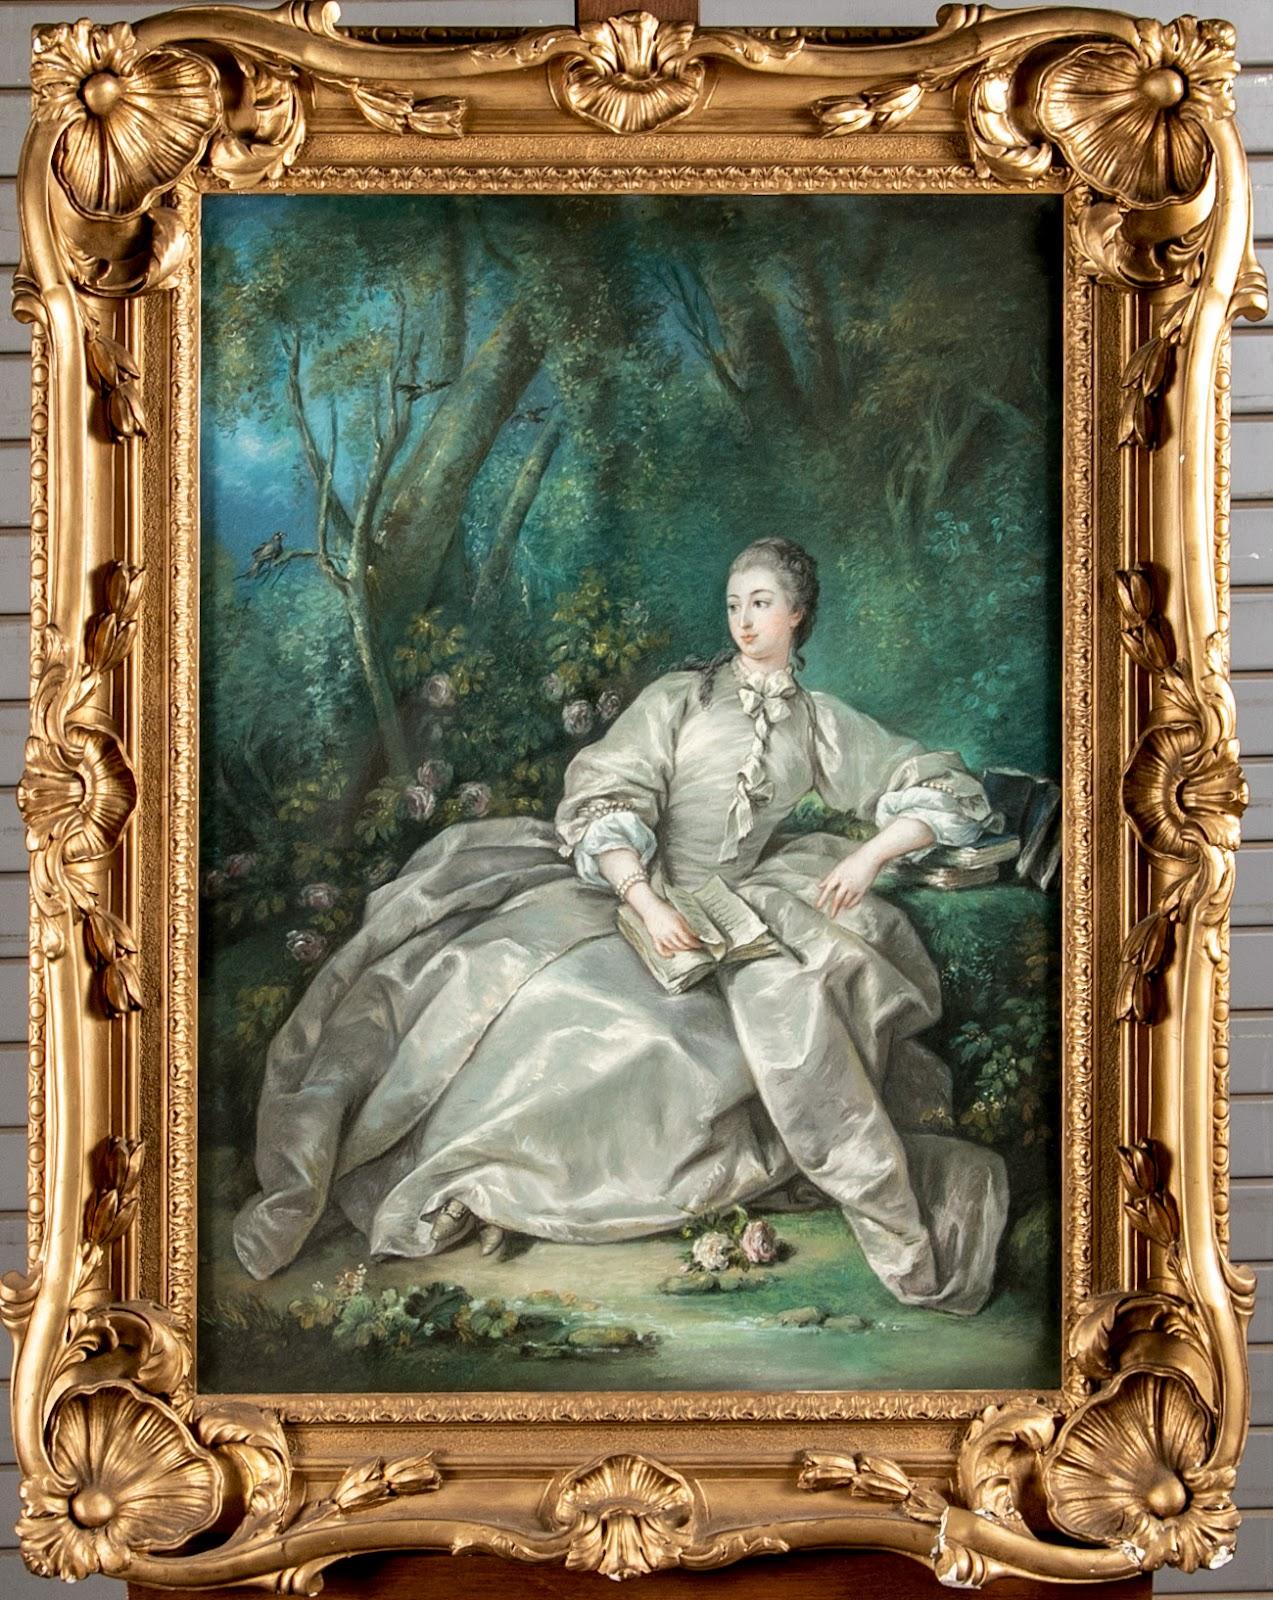 A beautiful classic oil painting in stunning carved gilt frame.